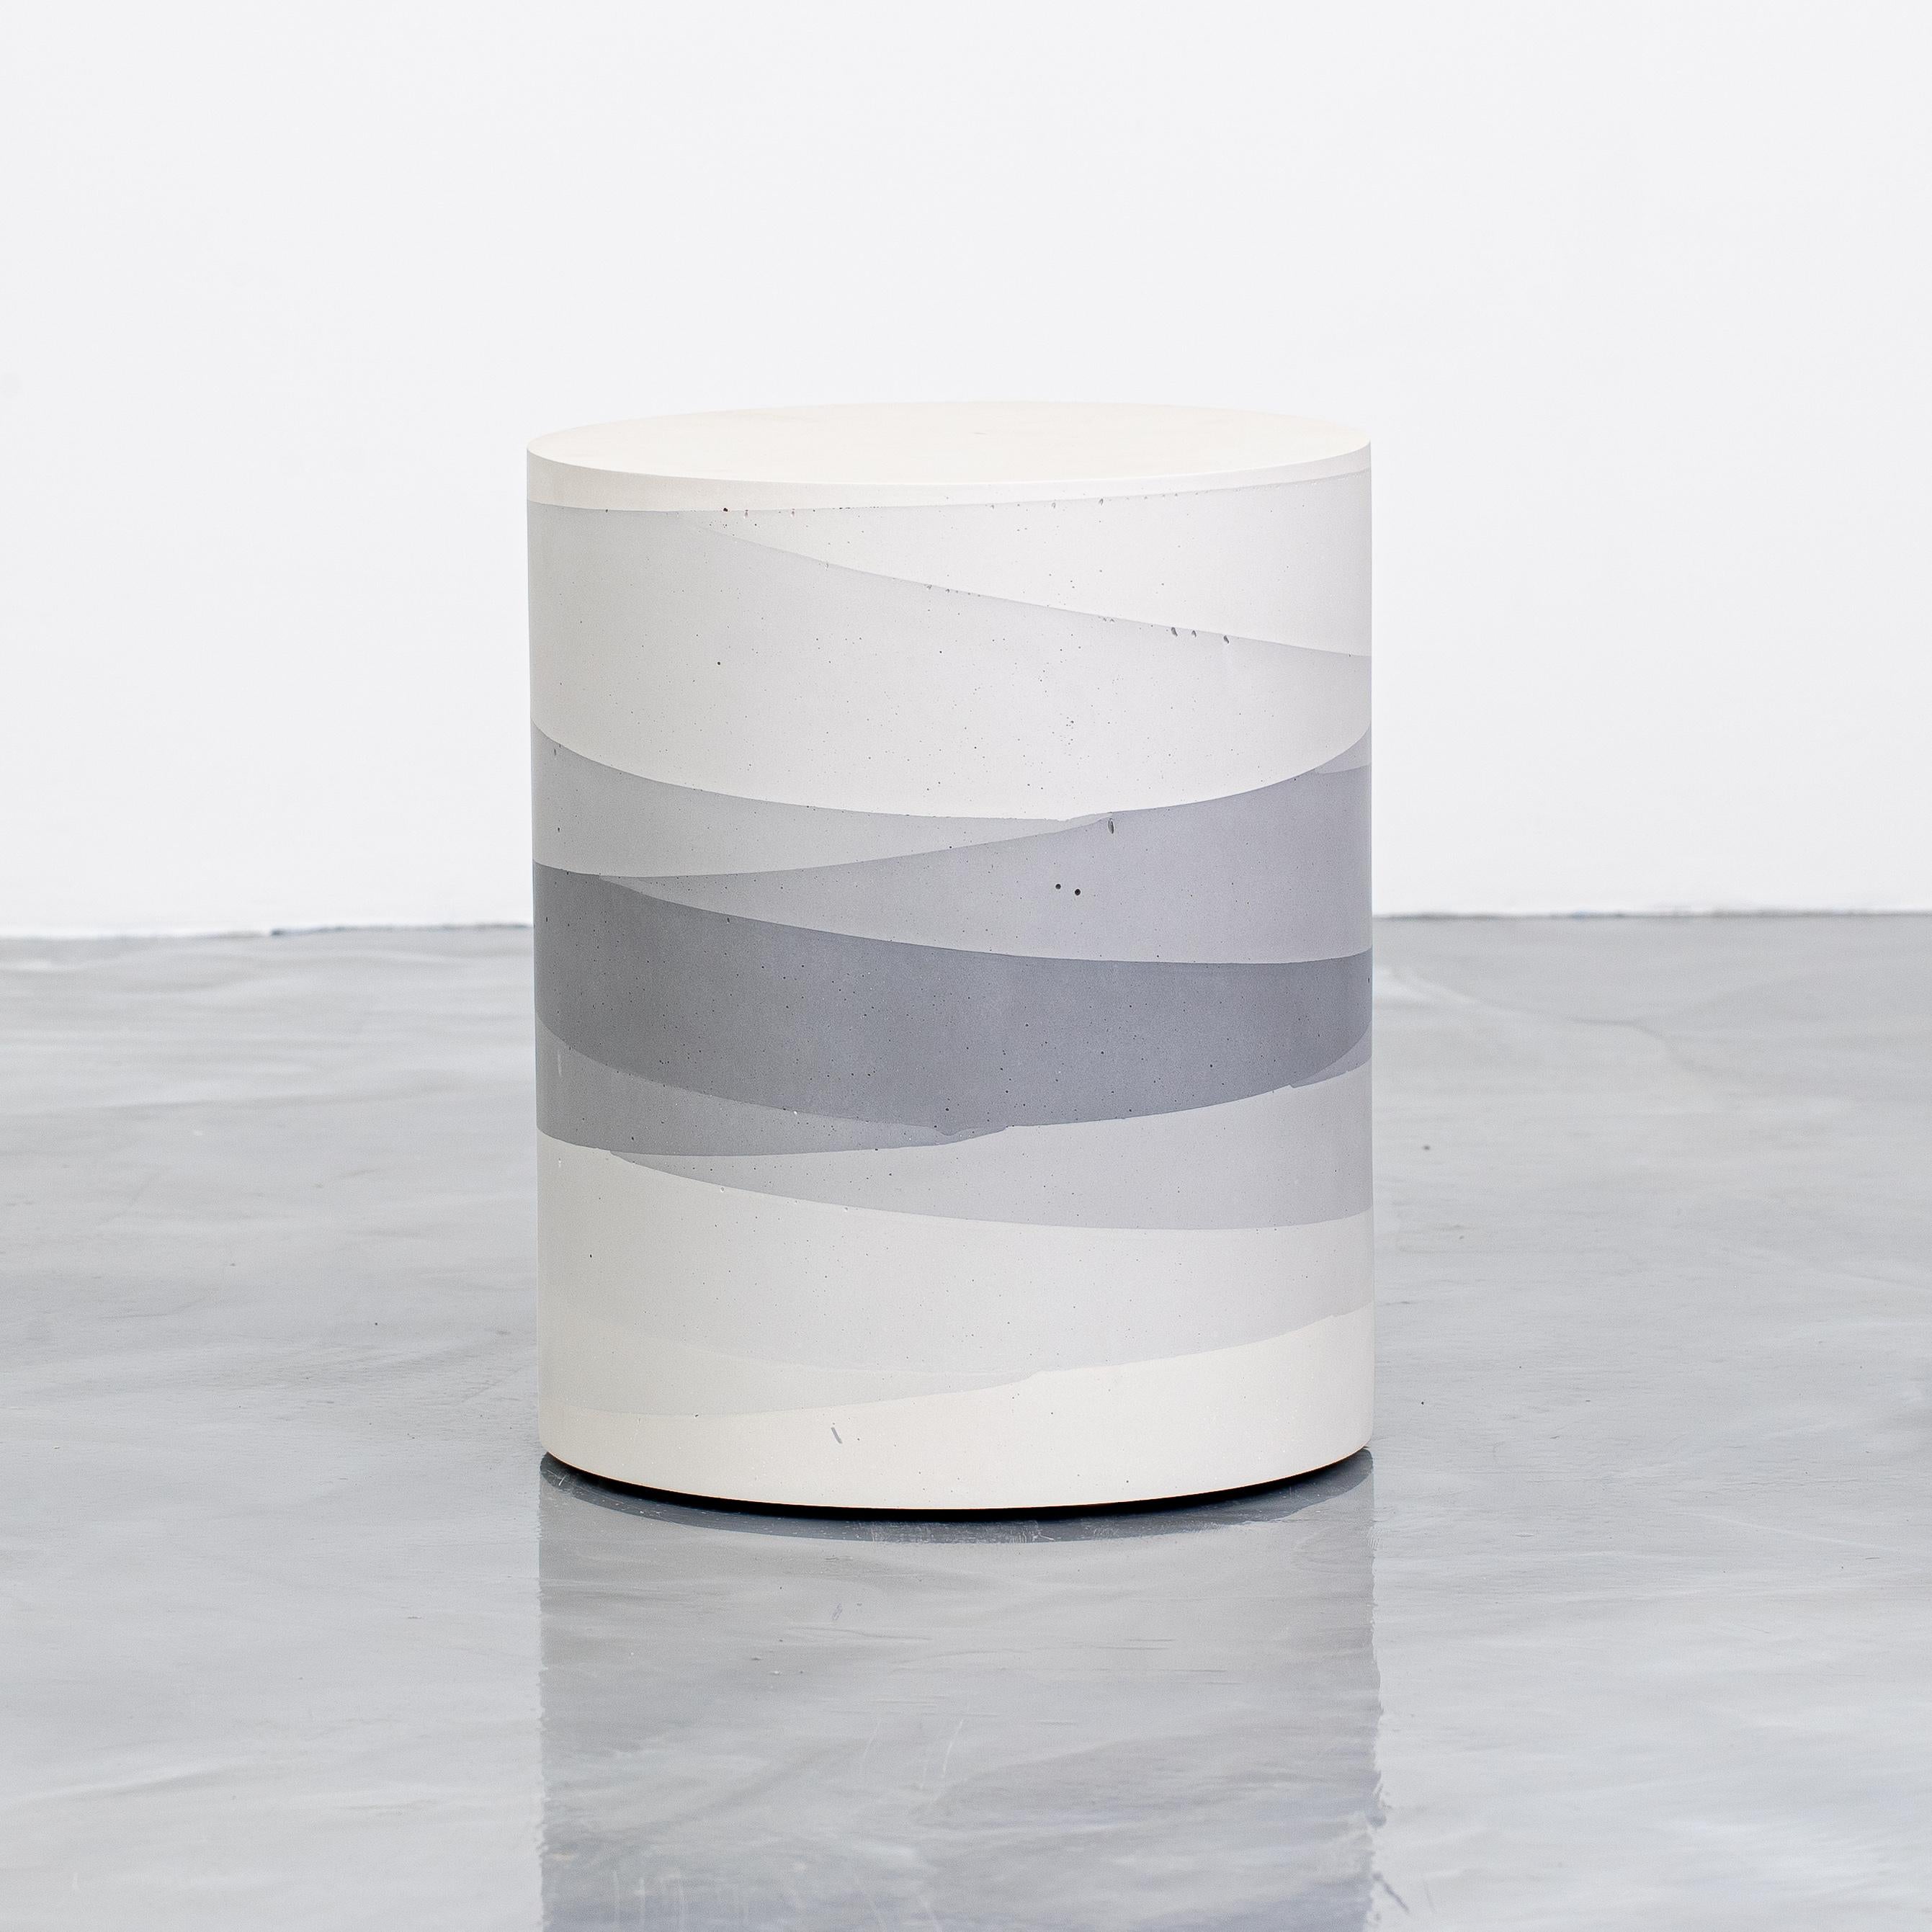 An exploration in the softness and subtly of the materials, the made-to-order drum has a hollow cavity and is cast entirely from hand-dyed cement. Poured in individual hand-dyed layers, starting from the base color grey and fading to white, the